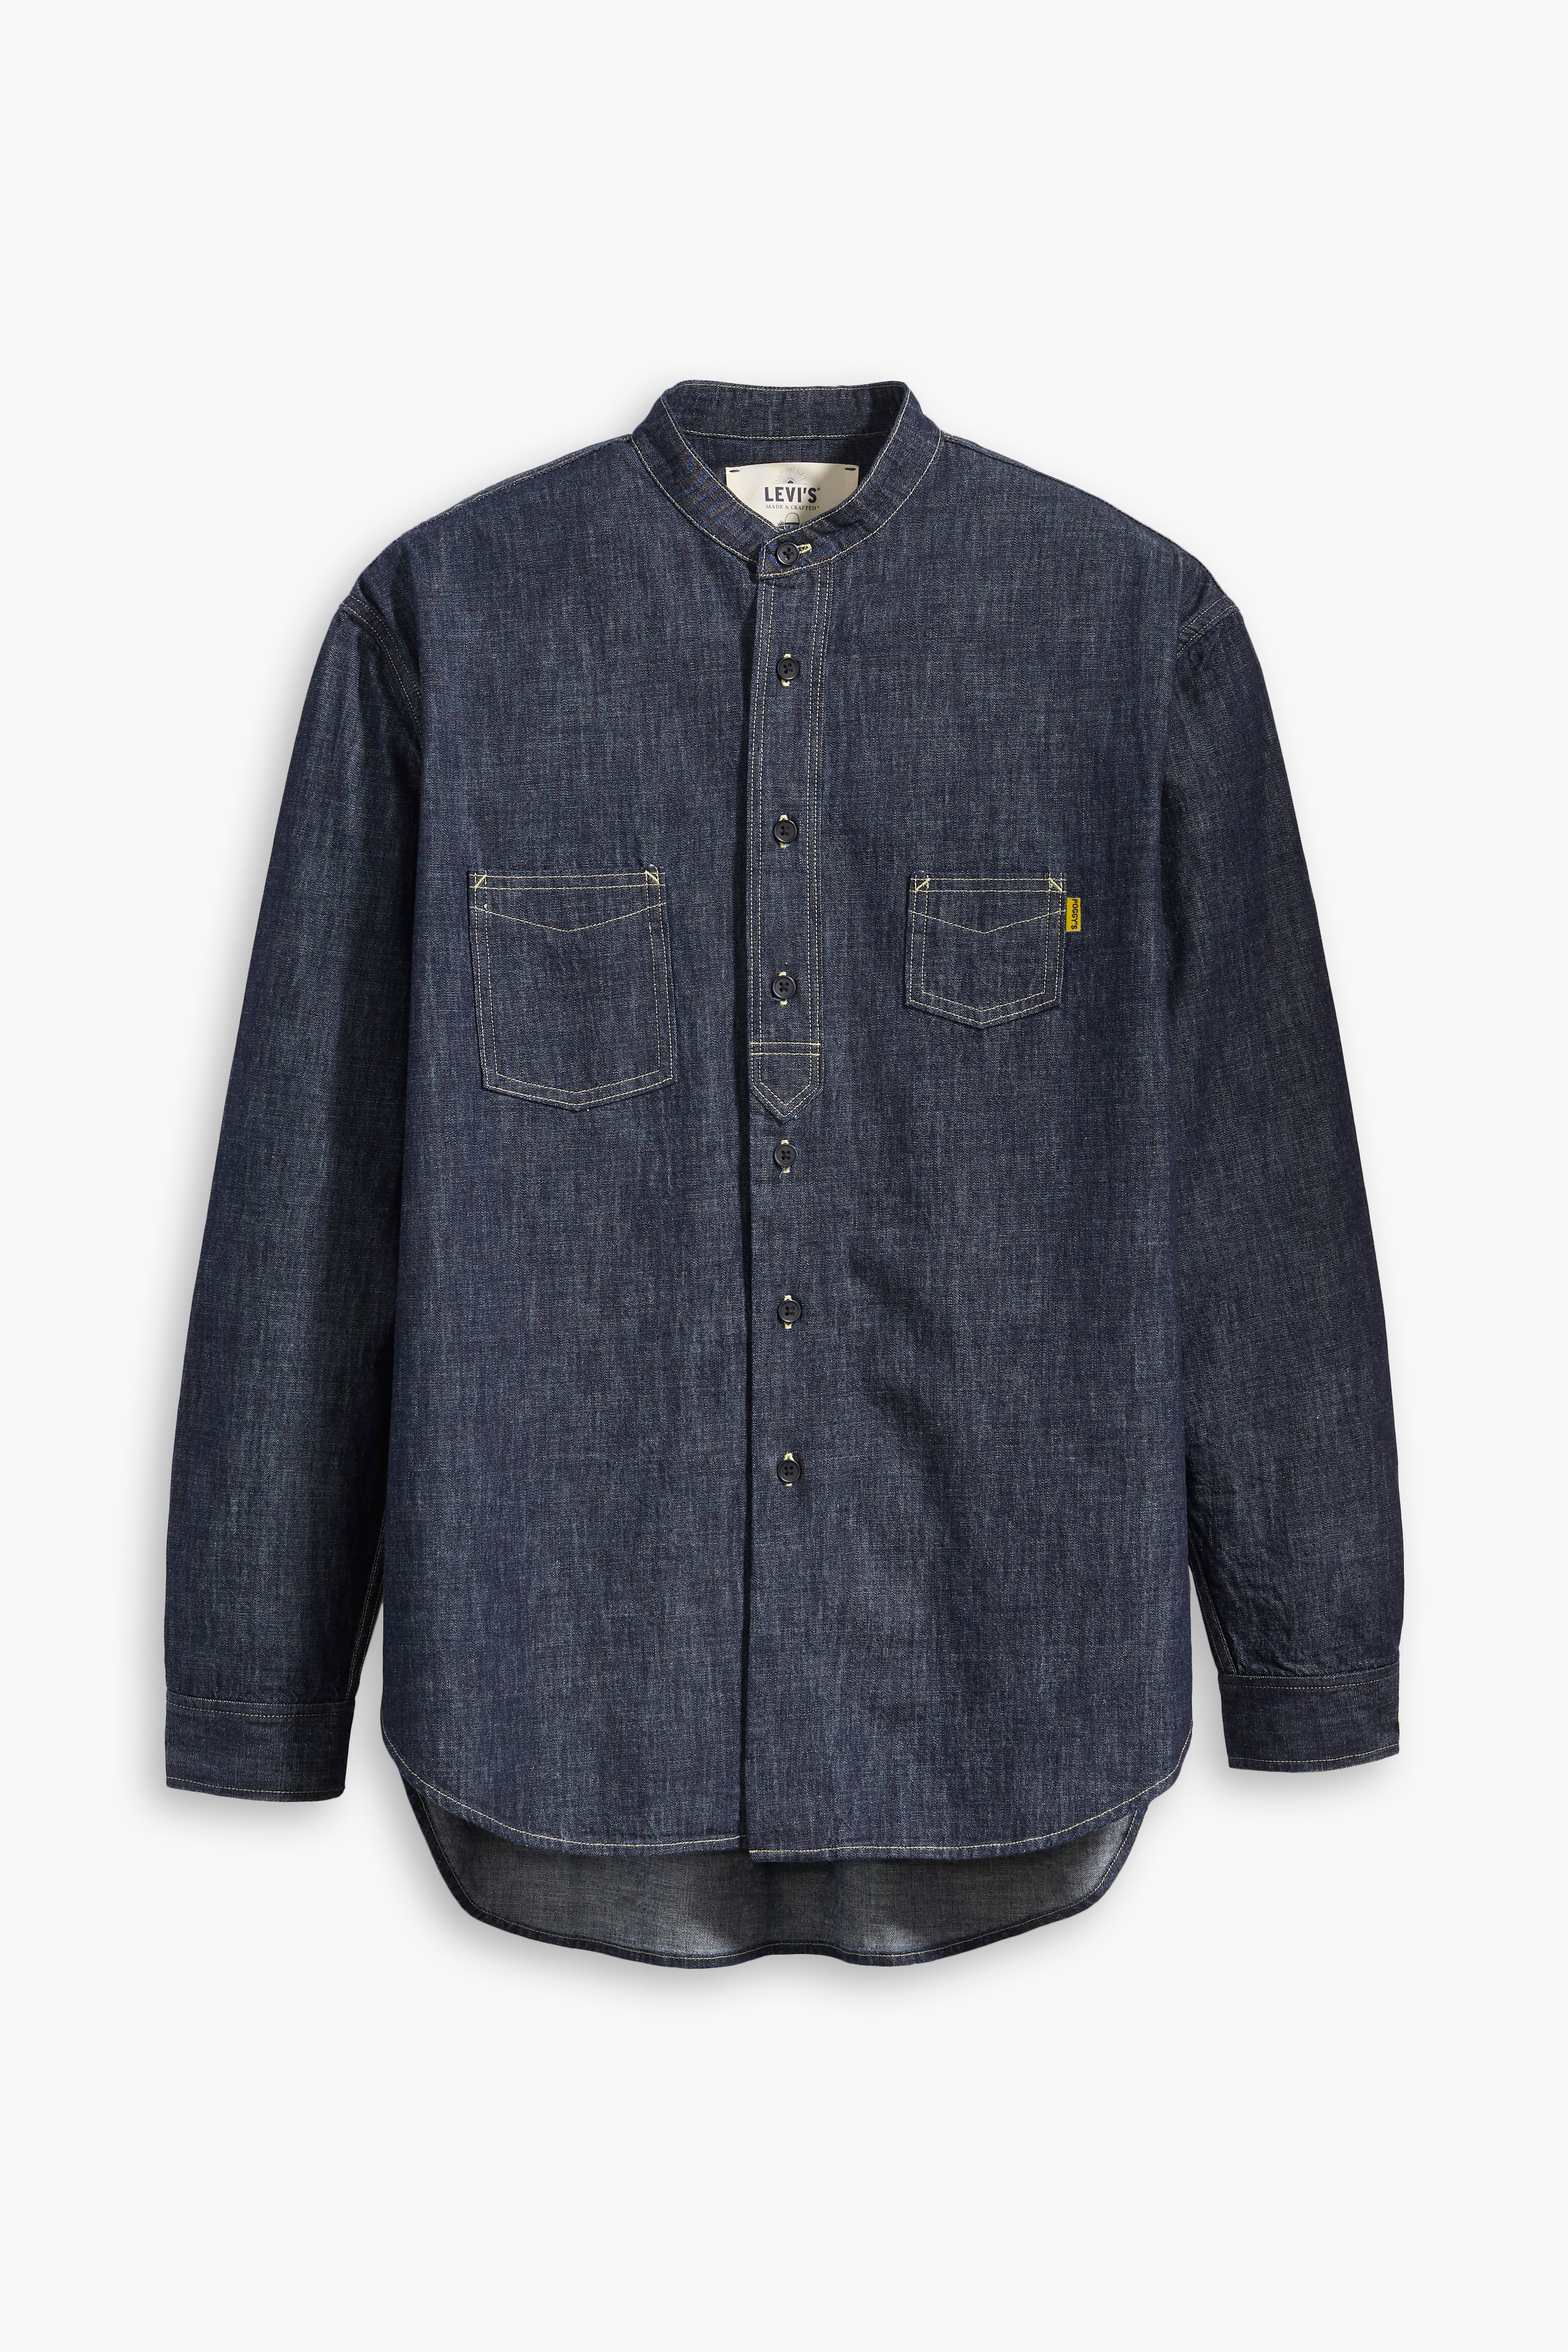 Poggy Levi's Fall Winter Capsule Collection